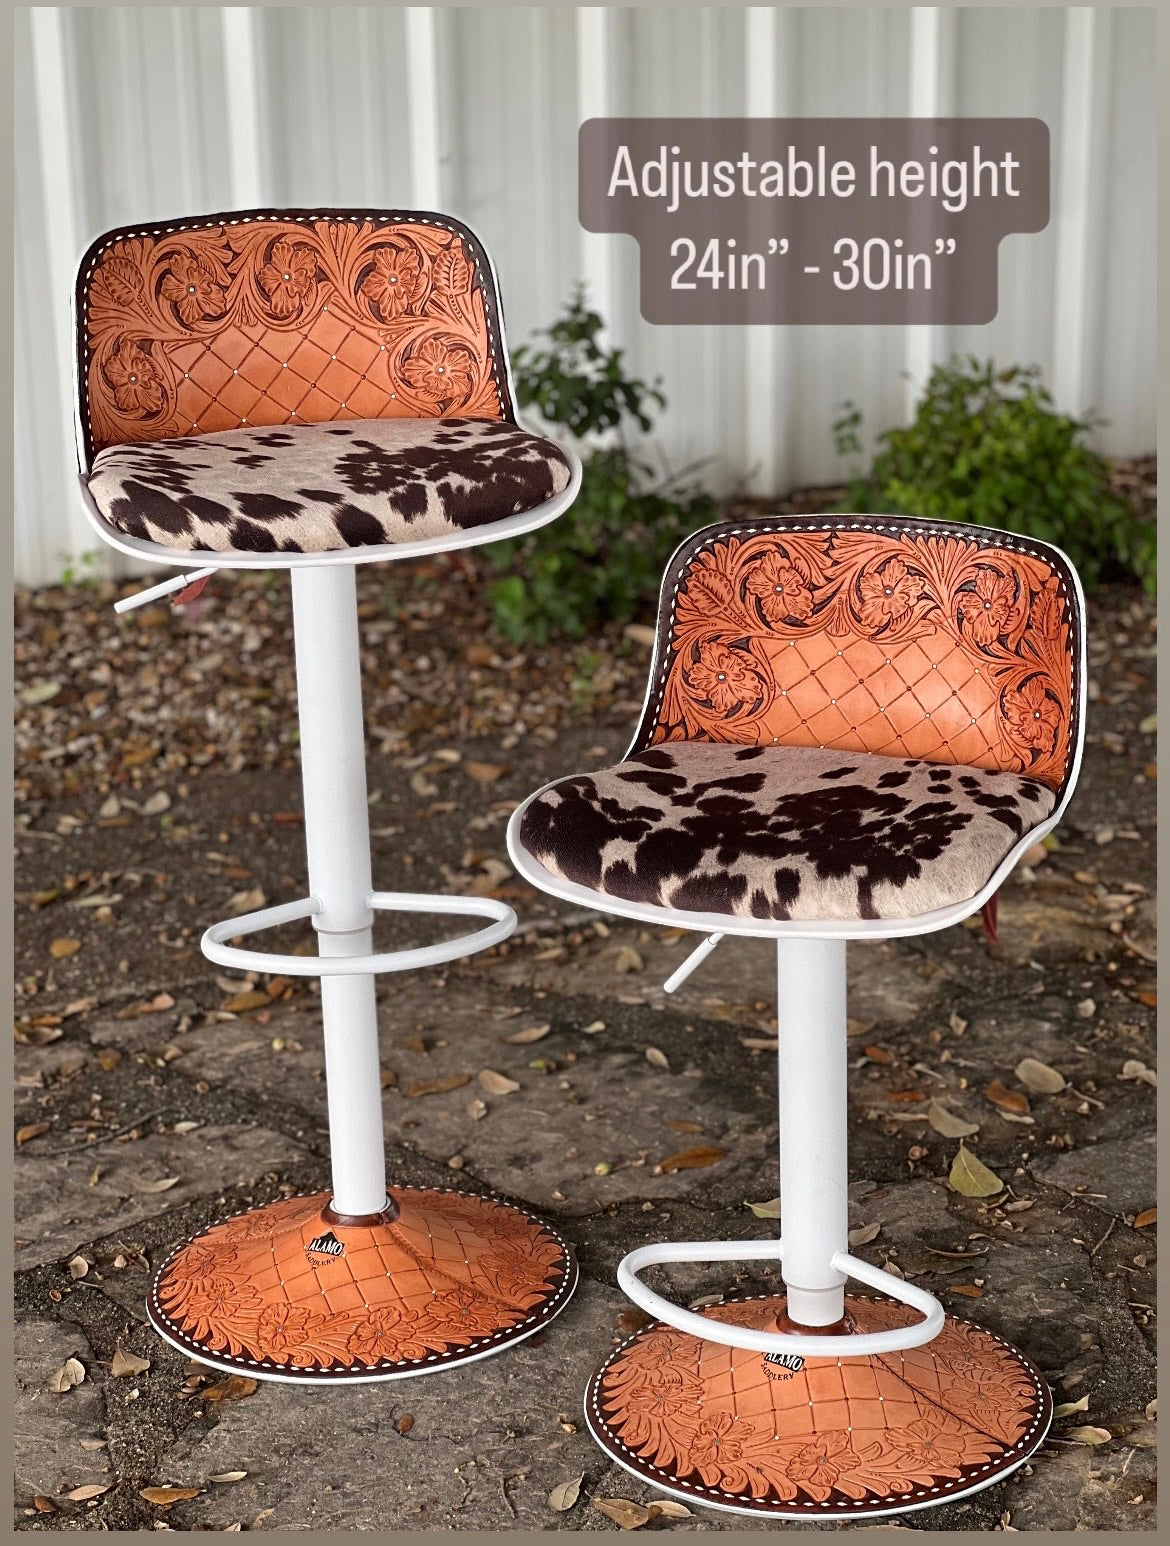 (PRE-ORDER) SET OF 2 The Cowboy Saloon Bar Stools (Style #1)